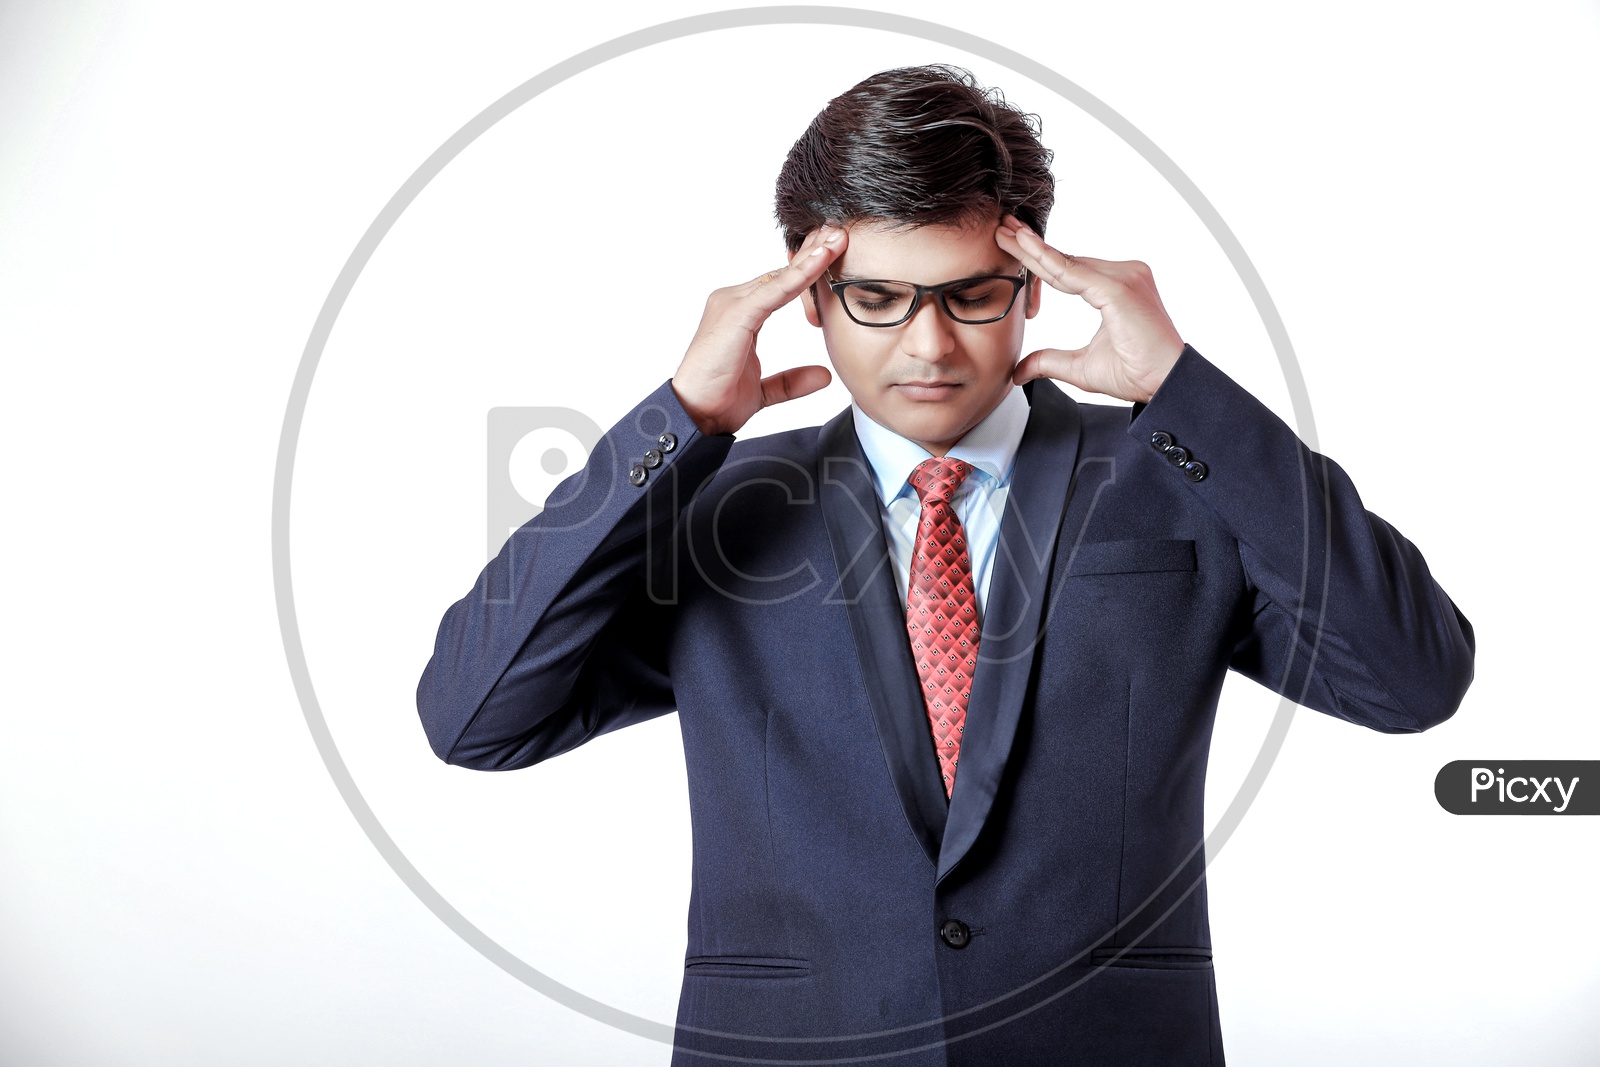 Indian Young Professional Man In Suite  with Expressions On Face and Showing Gestures